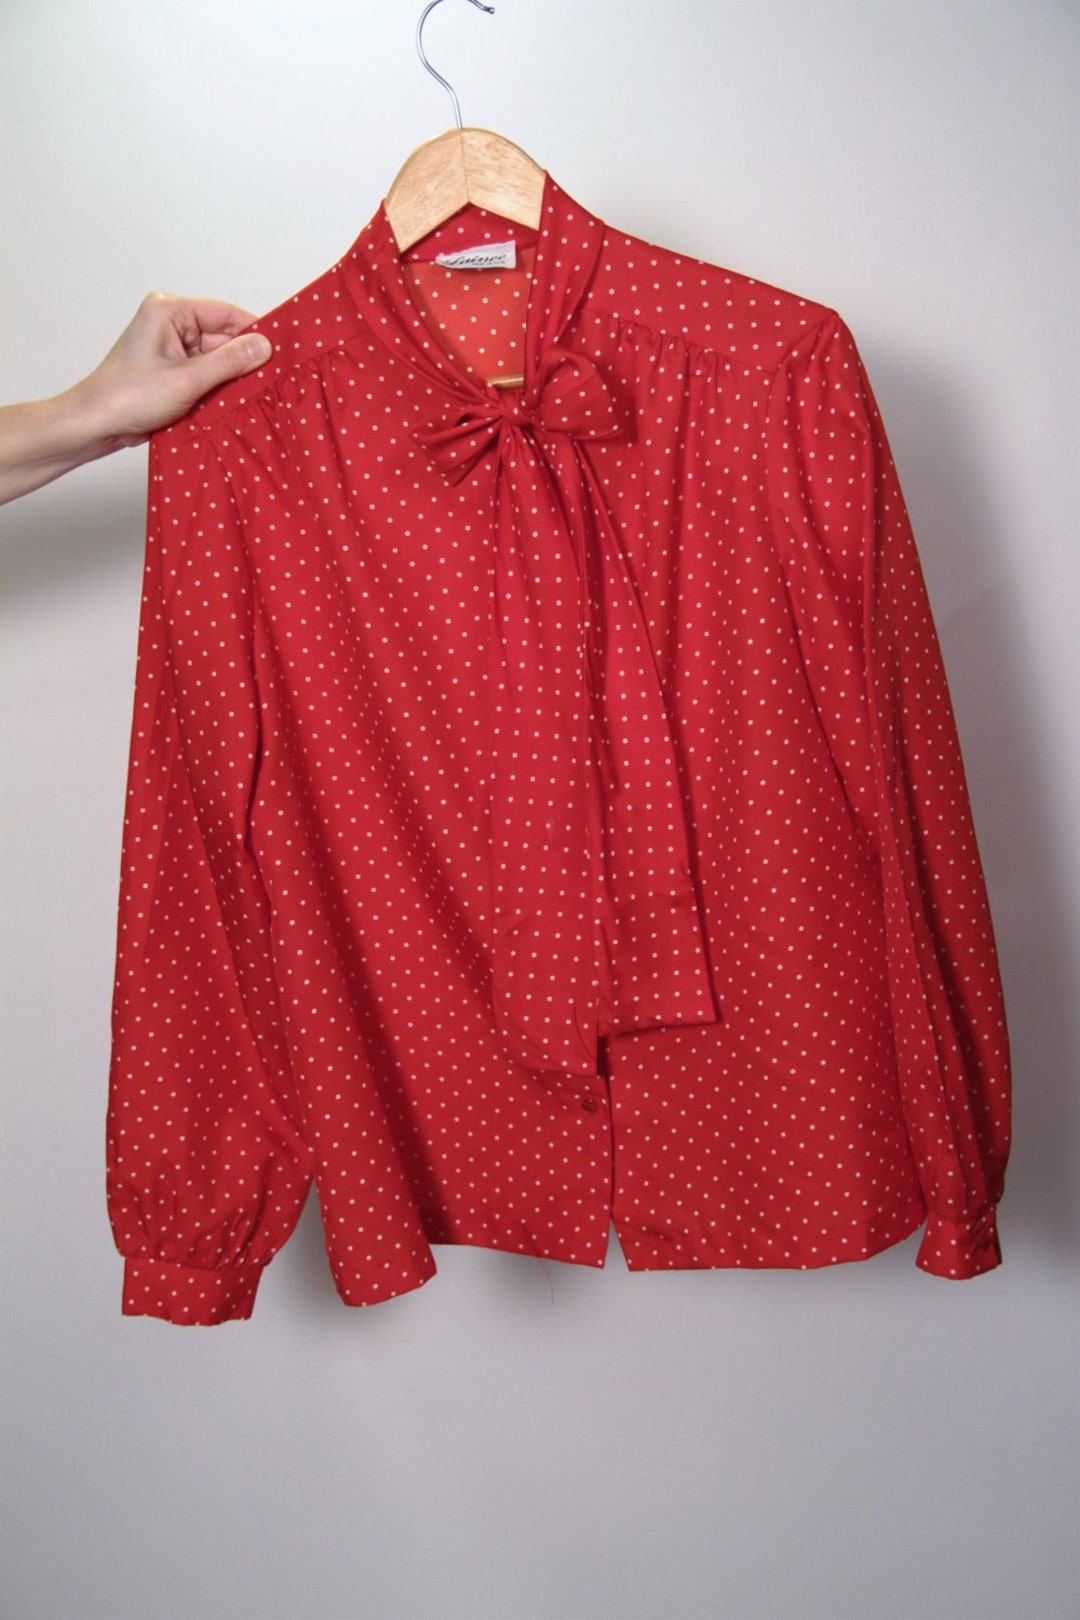 Vintage 70s Red Polka Dot Blouse With Neck Tie 